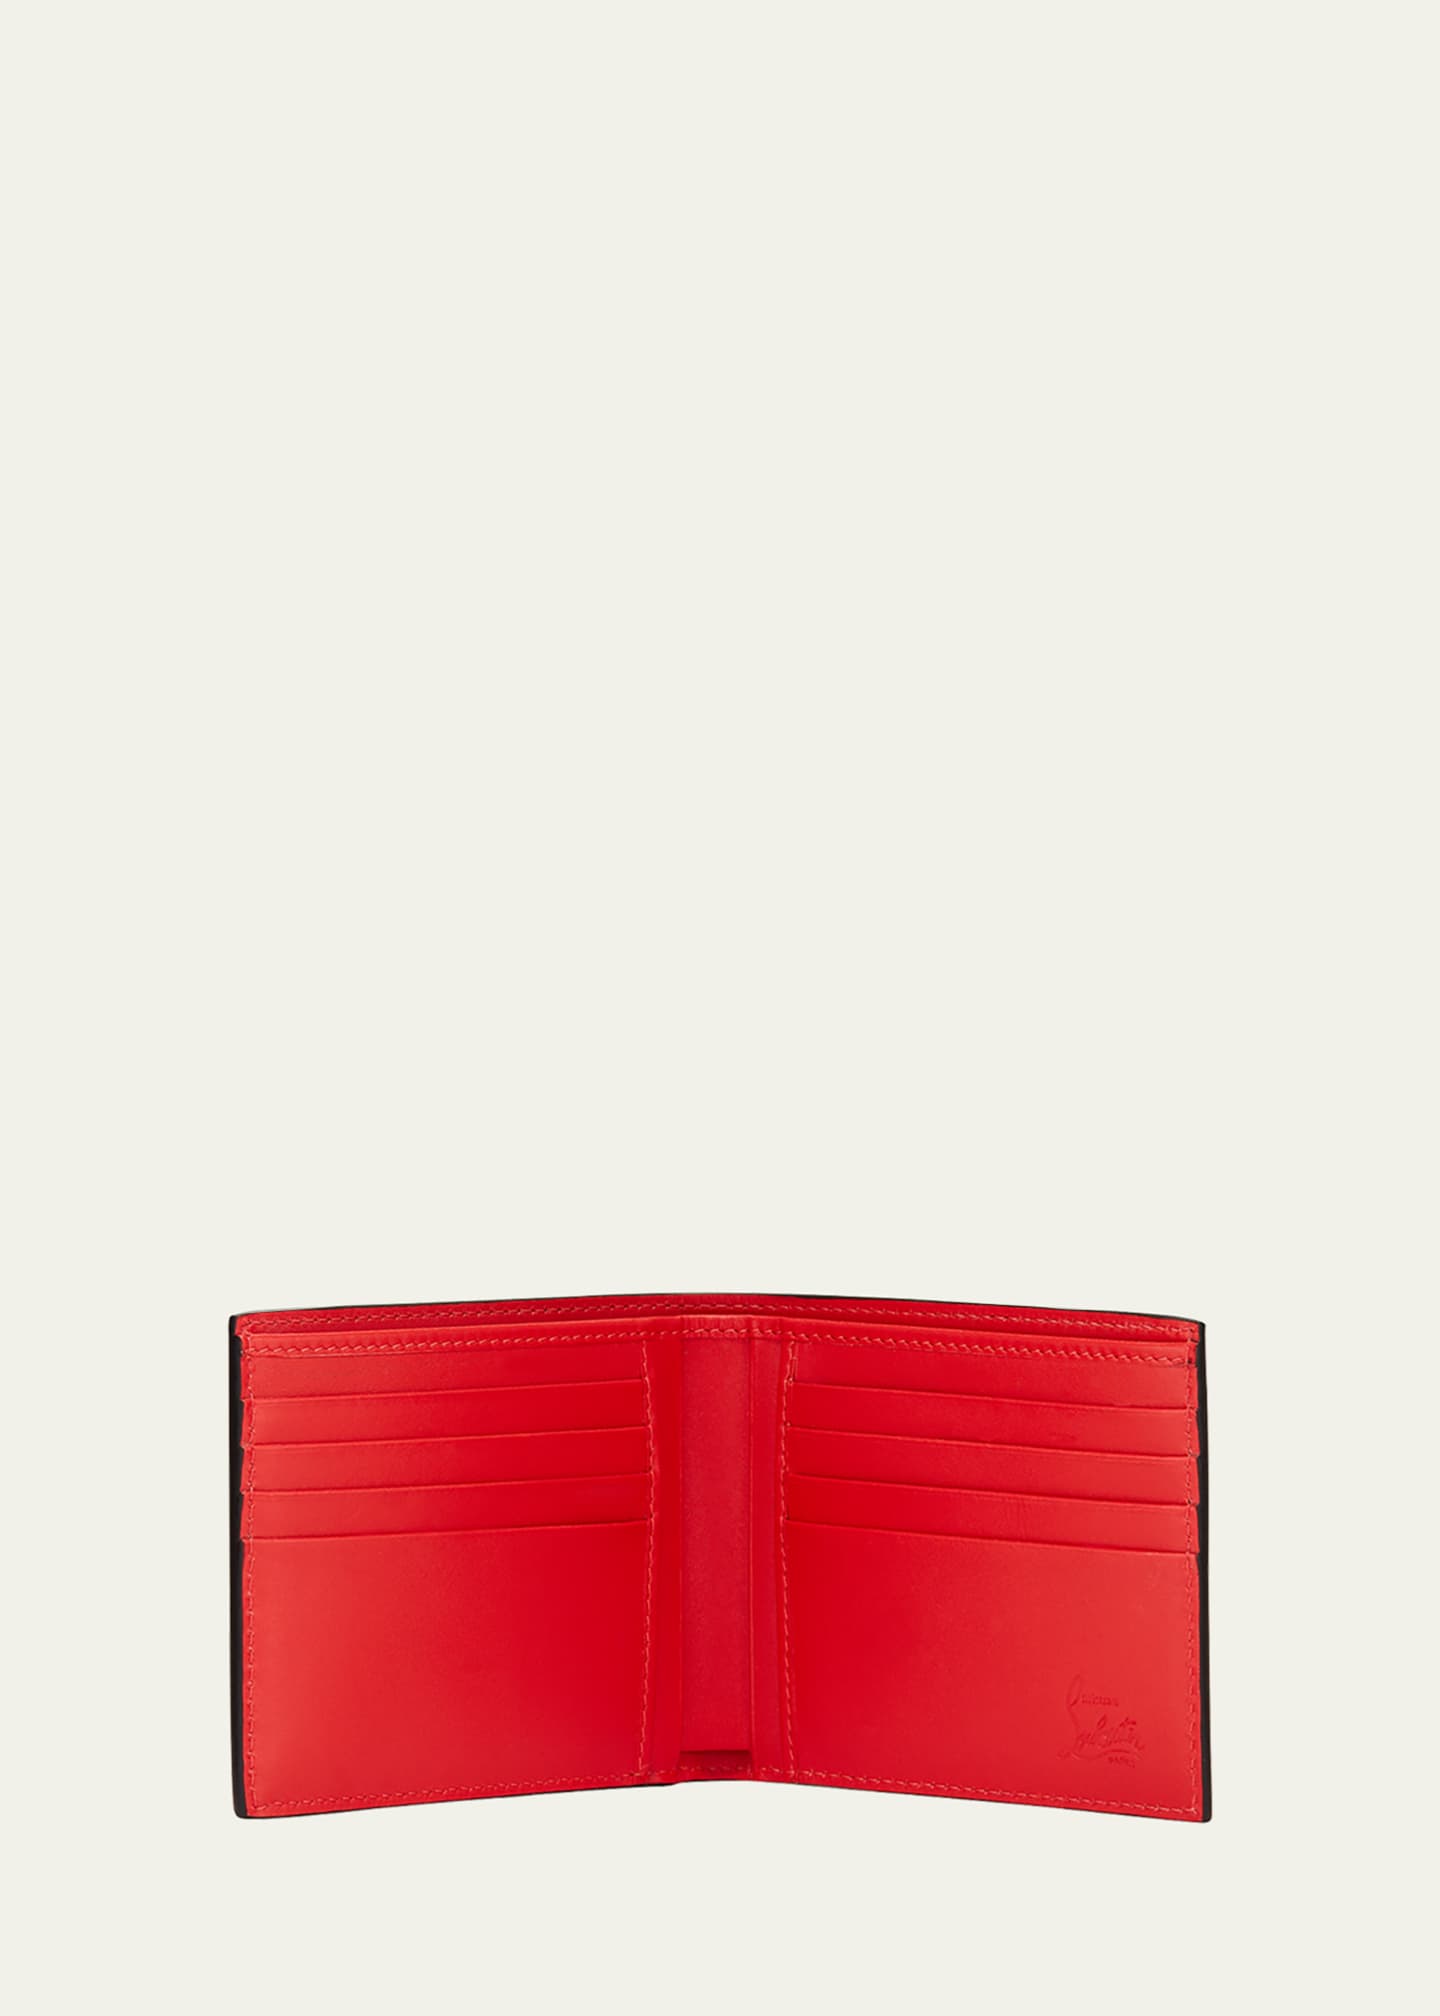 Christian Louboutin Men's Coolcard Two-Tone Leather Wallet Image 2 of 2